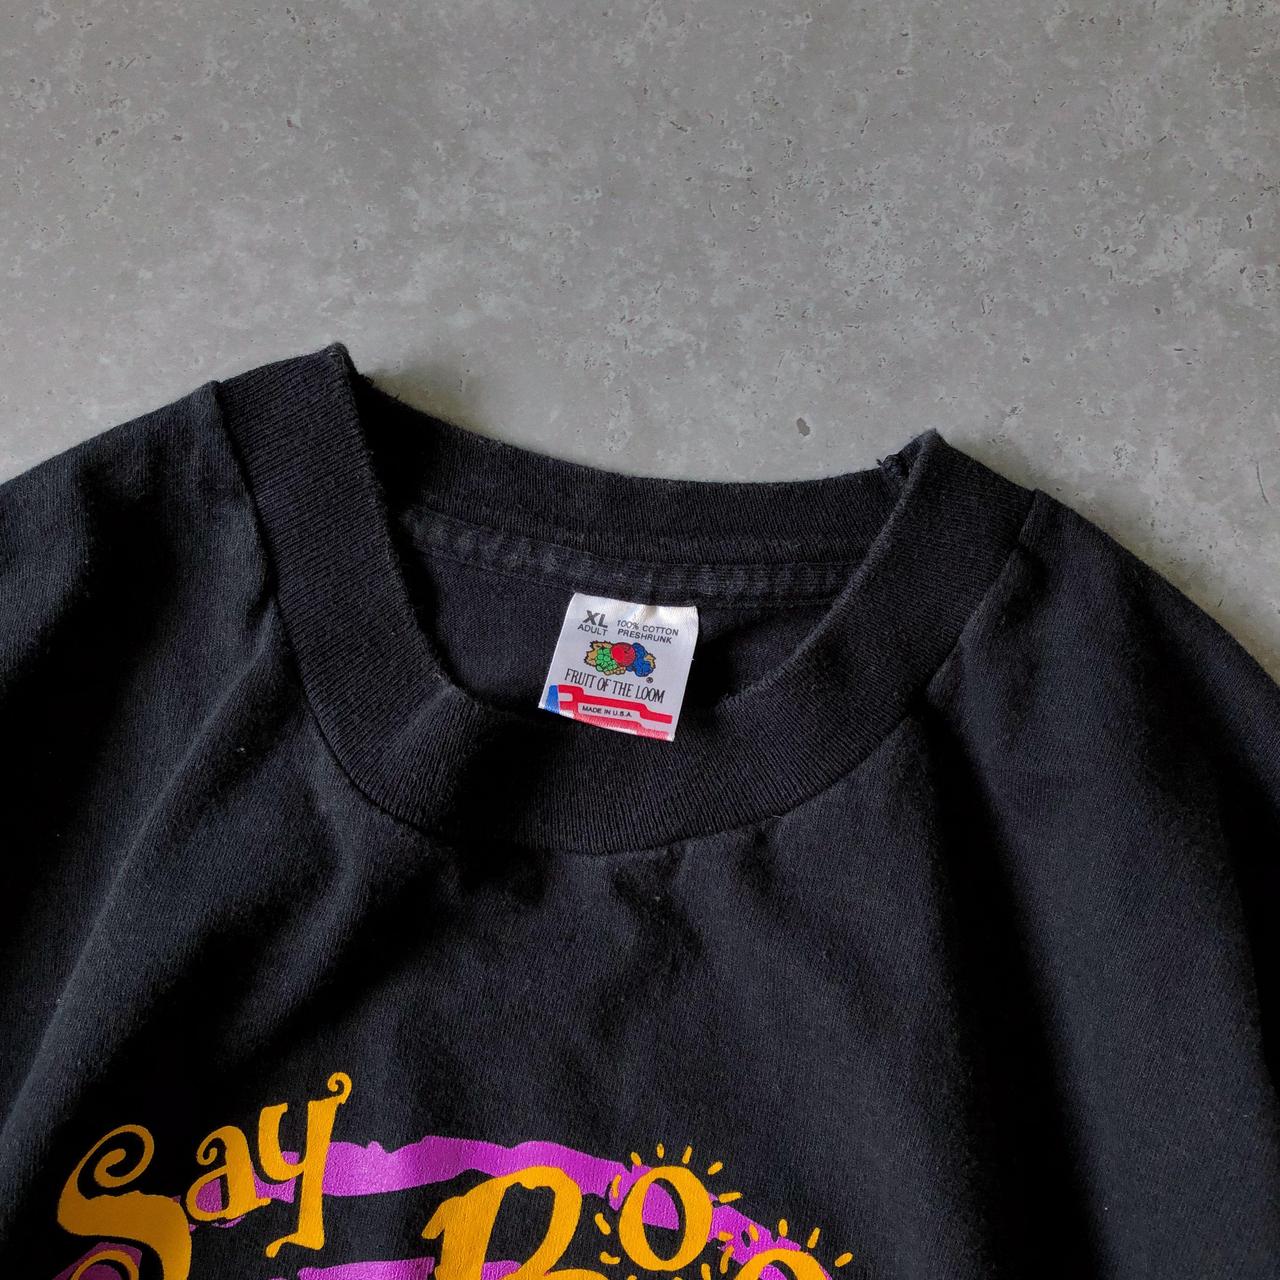 1990s - boxy single stitch 'say boo to drugs' graphic tee